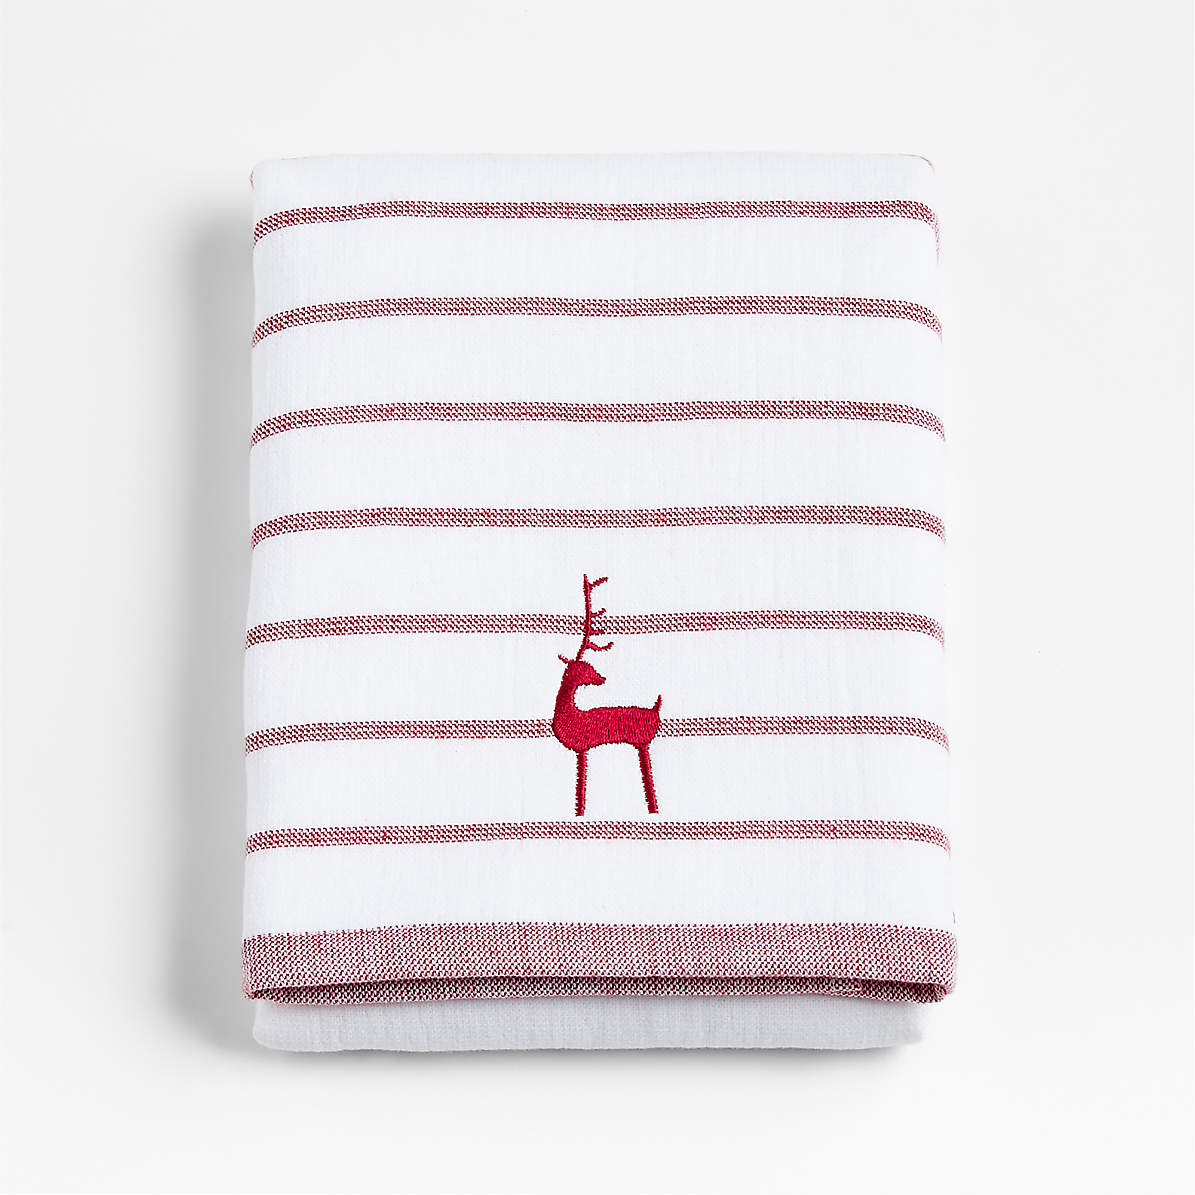 https://cb.scene7.com/is/image/Crate/OrgCttnMryRedRndrEmbGstTwlSSF23/$web_pdp_main_carousel_zoom_med$/231009111626/organic-cotton-luminous-red-reindeer-embroidered-guest-towel.jpg